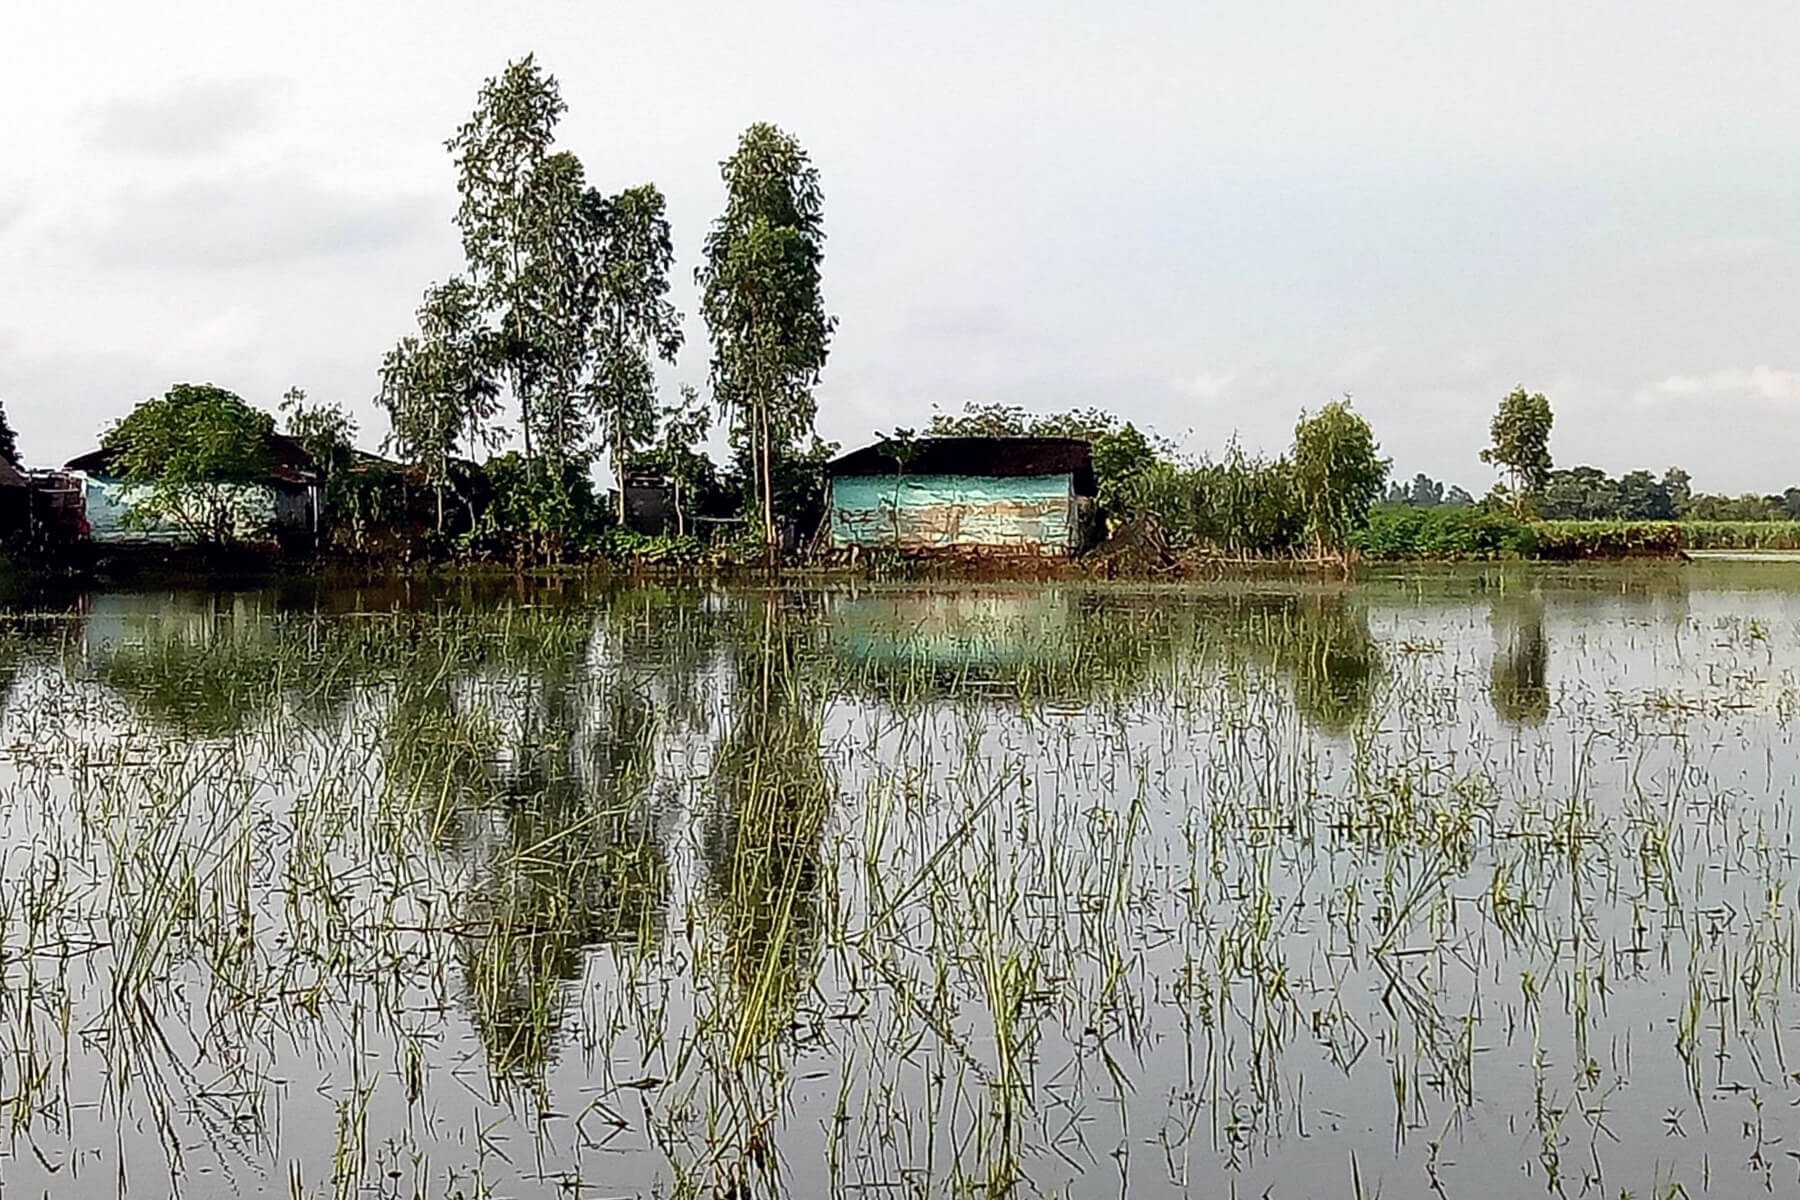 Crops destroyed by flood waters in Rautahat district